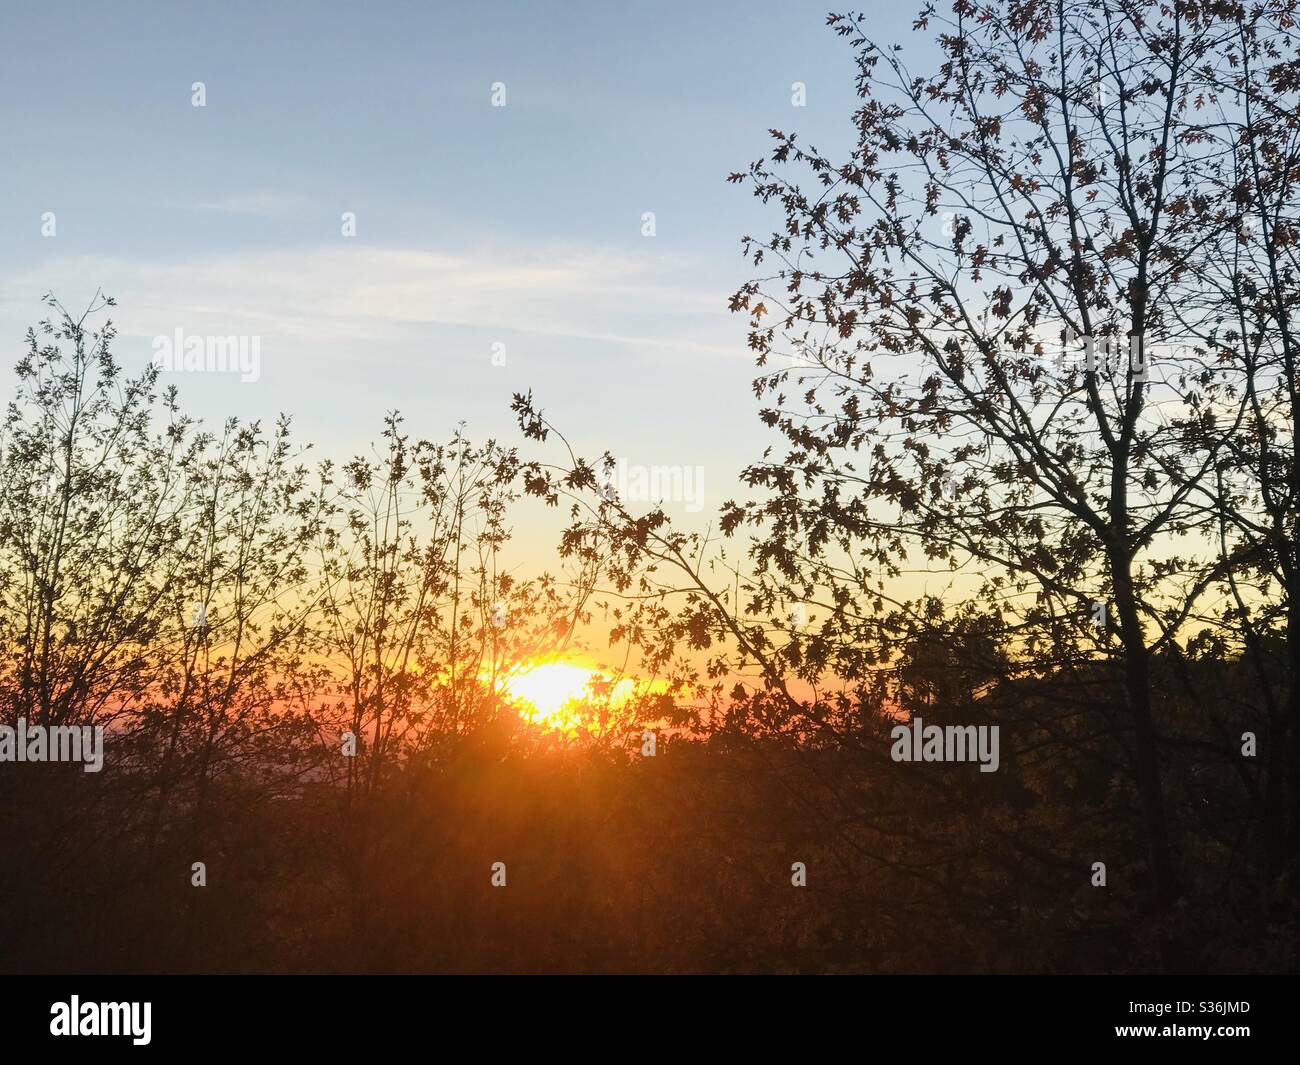 A sunset in front of tree silhouettes. Stock Photo